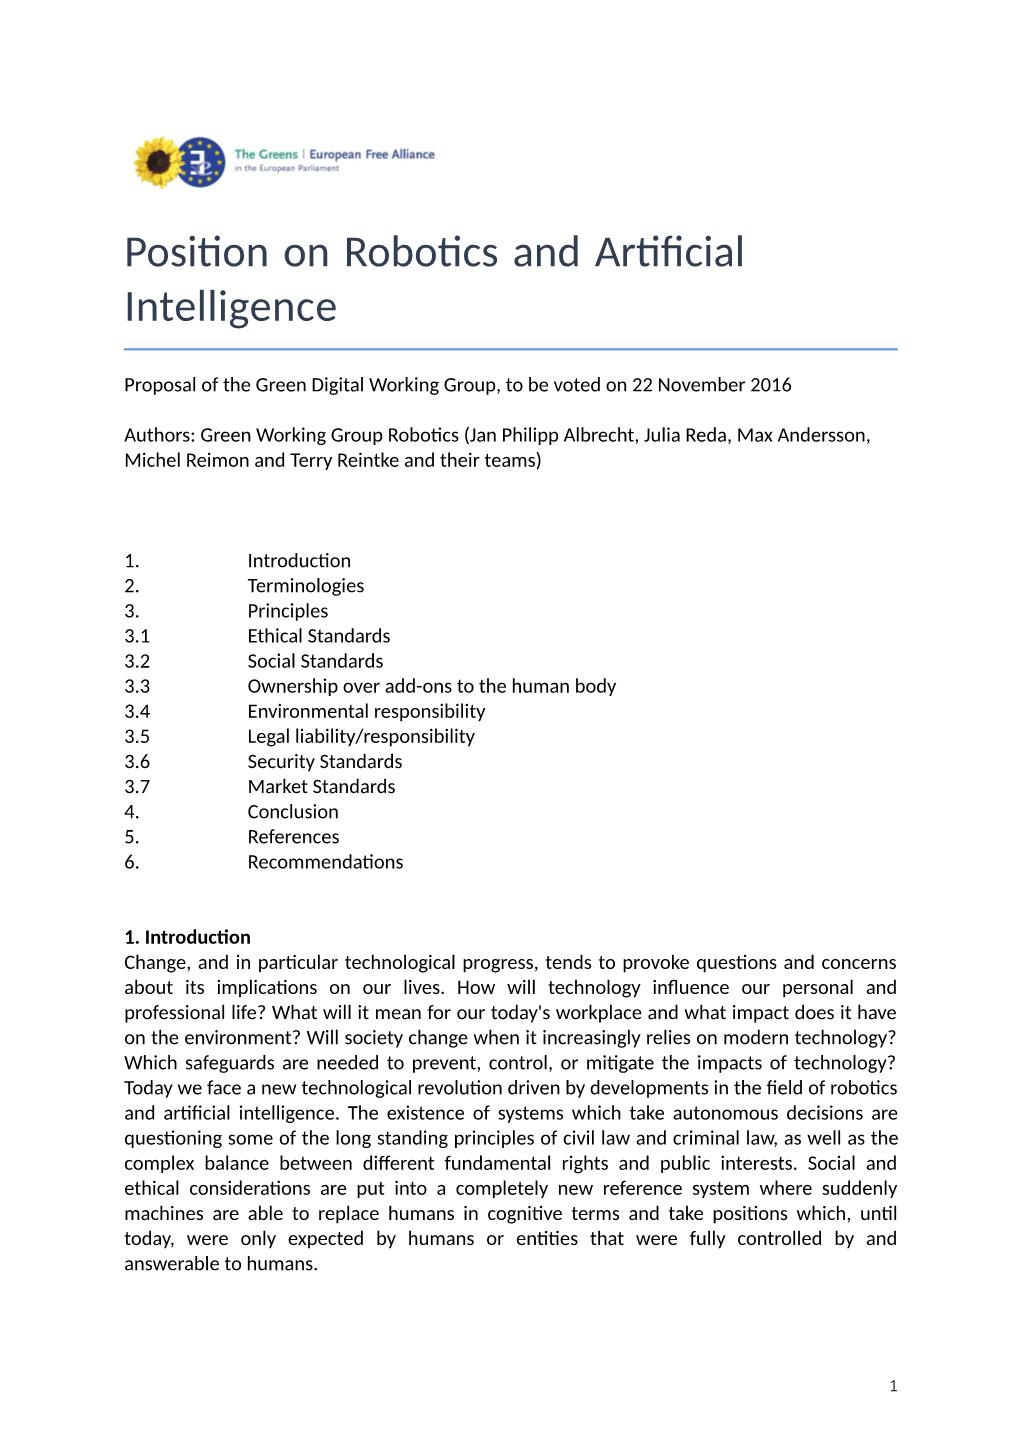 Position on Robotics and Artificial Intelligence